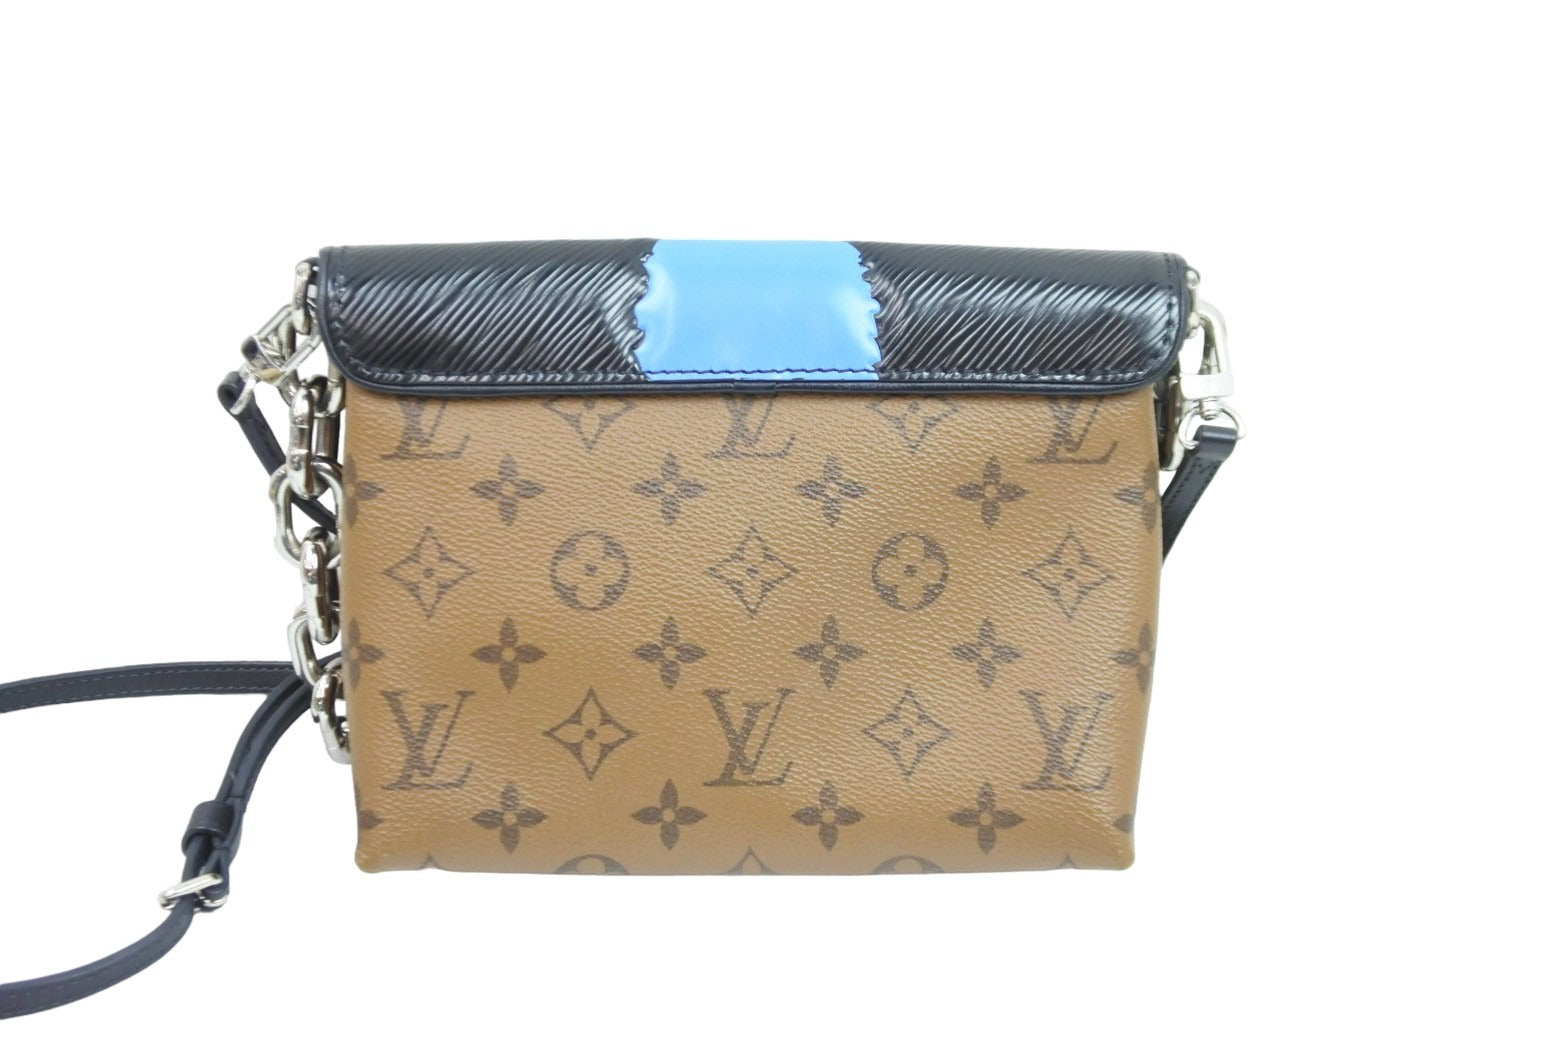 LOUIS VUITTON ルイヴィトン ハンドバッグ 2WAY チェーン ポシェット ...